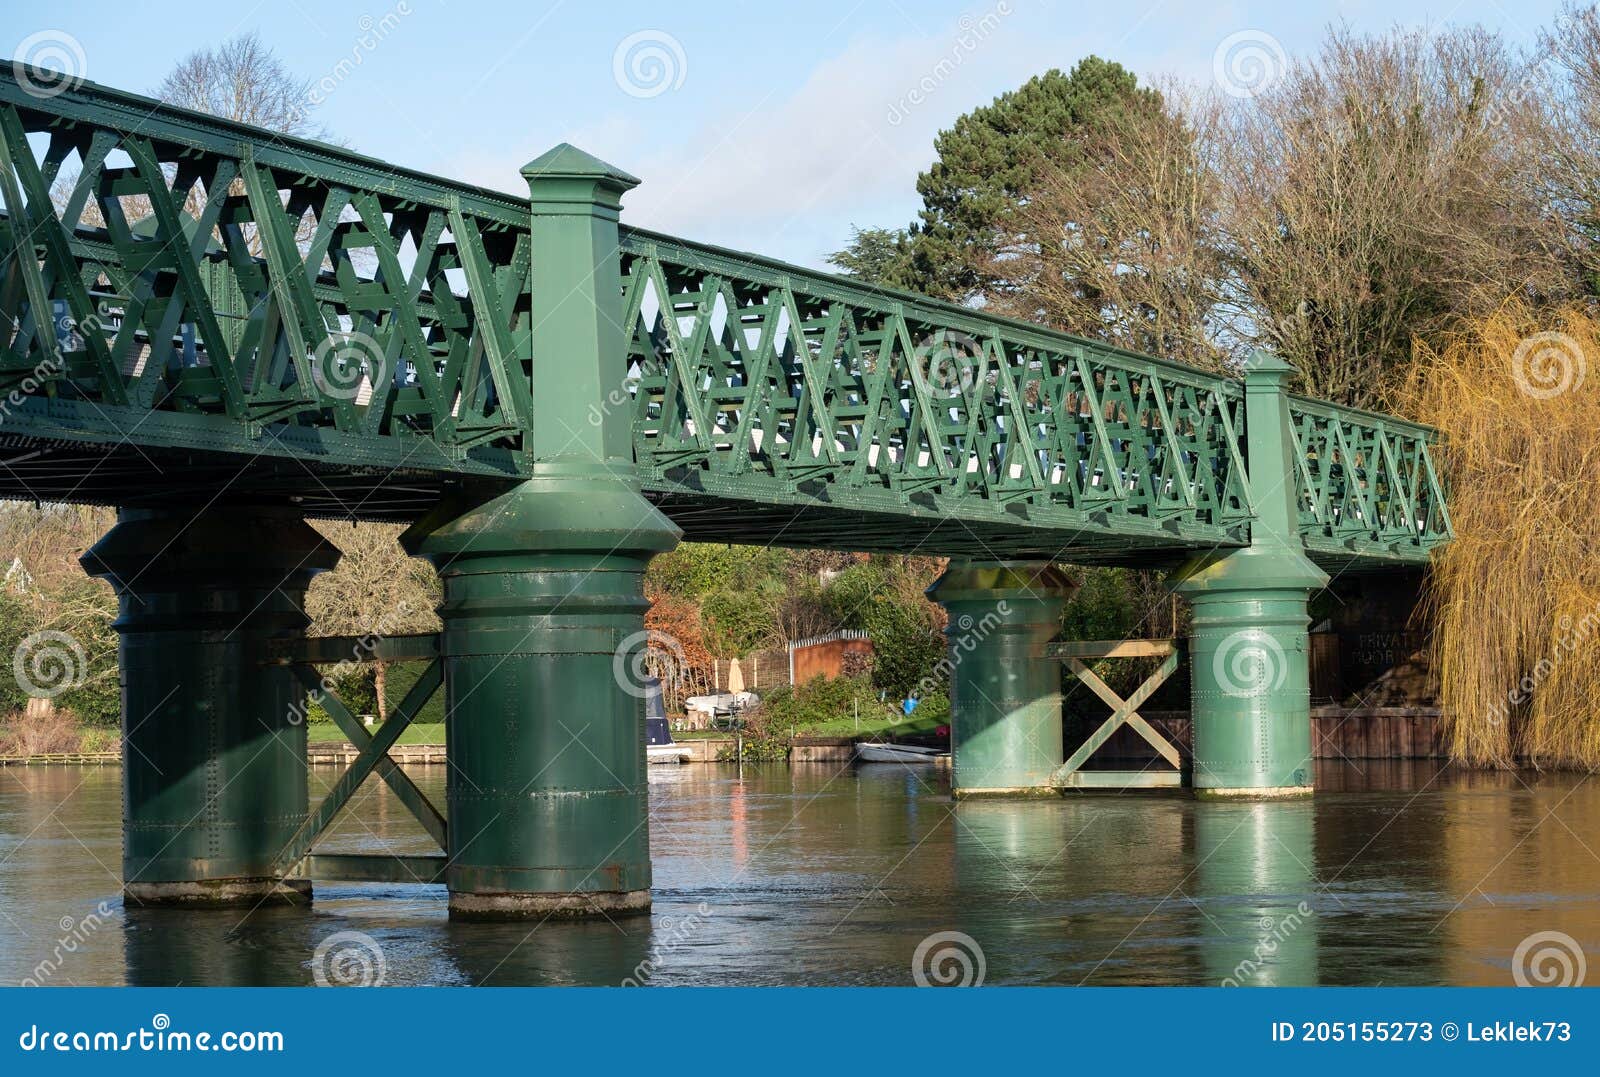 bourne end railway bridge across the river thames at cookham, berskhire uk